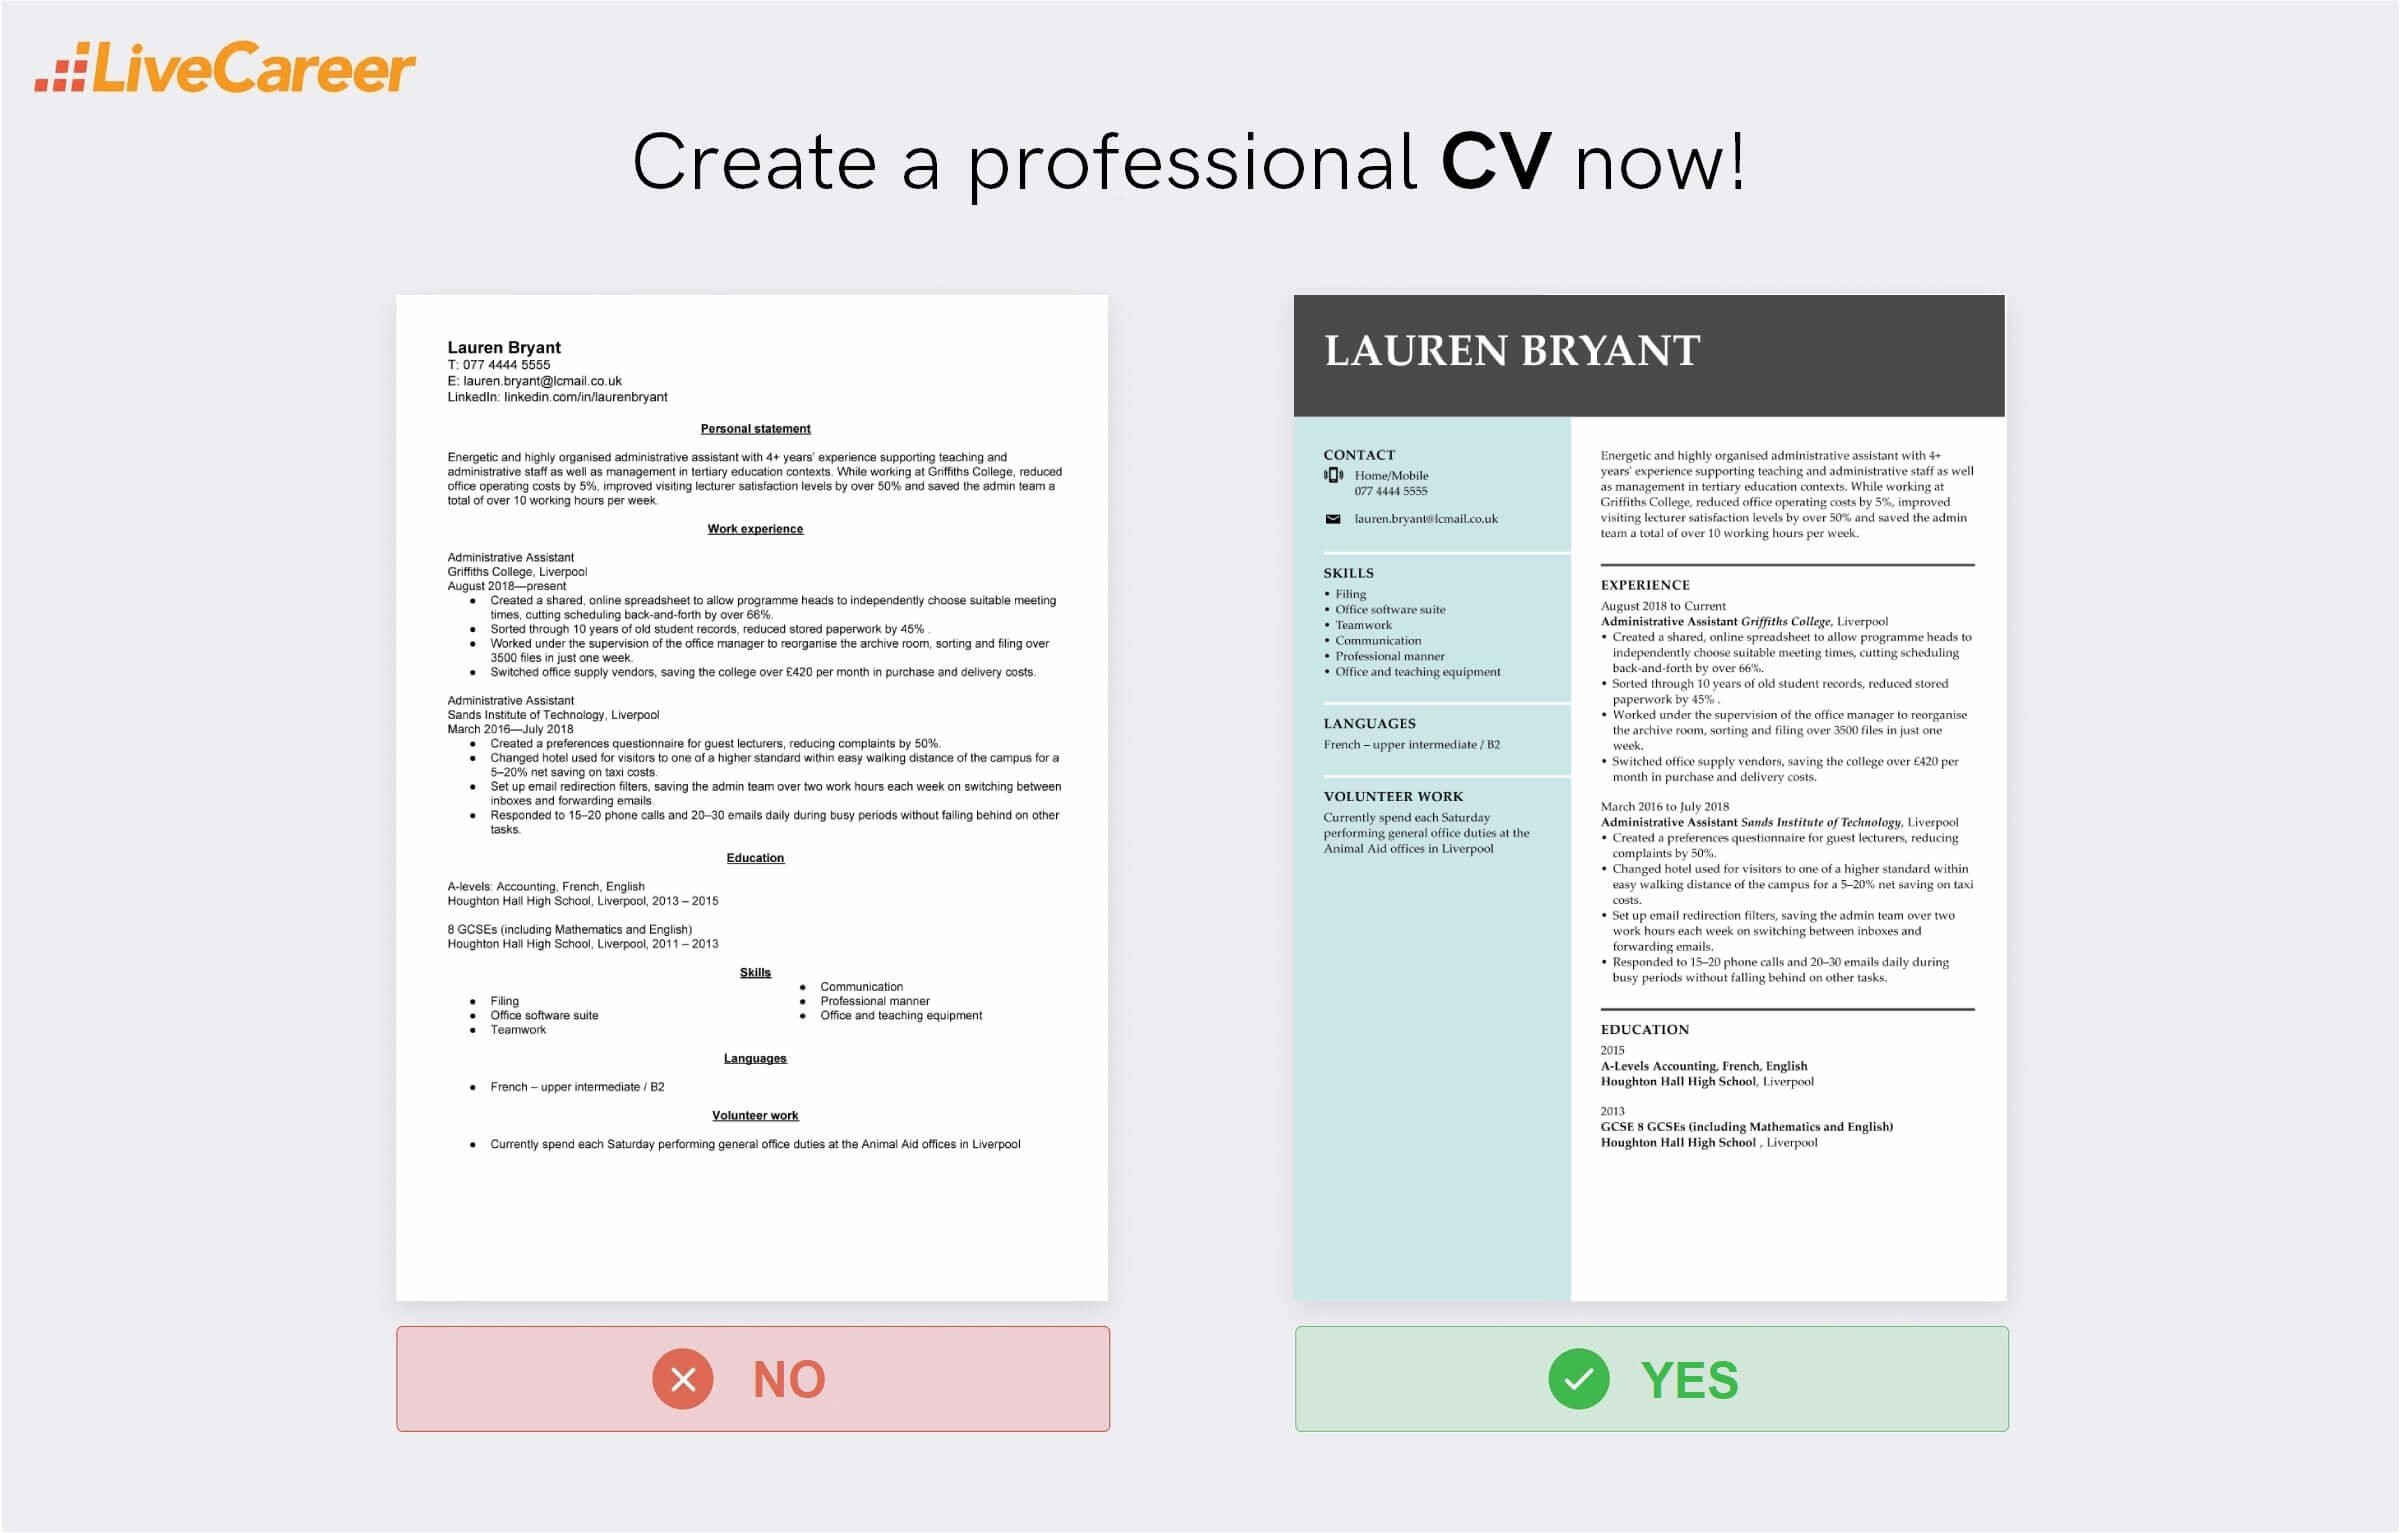 Last Line Resume Sample I Hereby Better Ways to Say Please Find attached My Cv (alternatives)